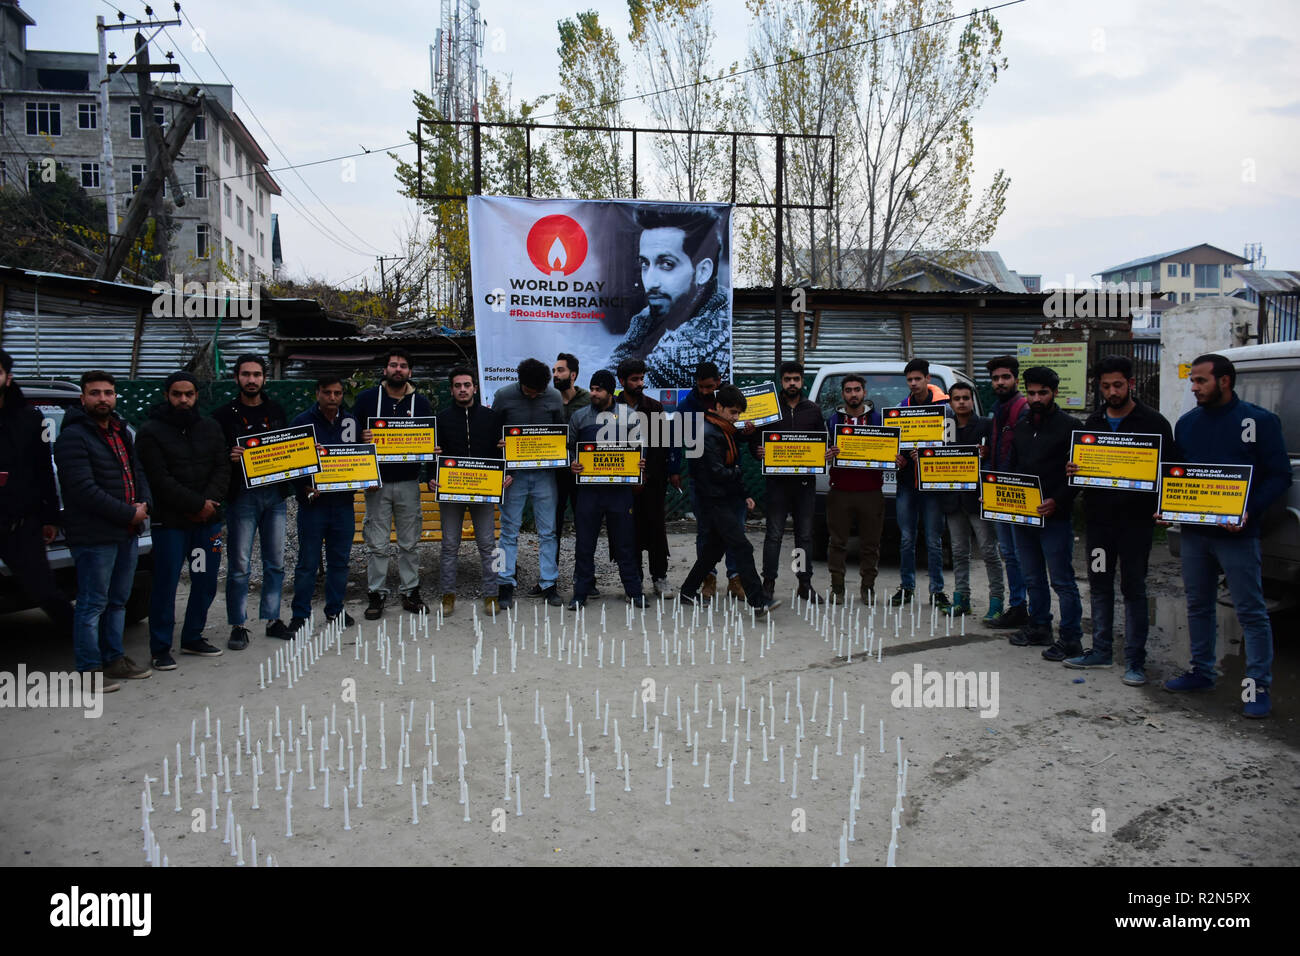 November 18, 2018 - A large crowd of people attend a vigil to remember the victims of road accidents in Srinagar, in Indian administered Kashmir on the occasion of the World Day of Remembrance for Road Traffic Victims on 18th November 2018. Participants hold banners calling for the government to make and enforce good roads safety laws, to ensure roads and vehicles are safe, and to provide prompt emergency care for road traffic victims. According to the Indian ministry of road transport and highways, the Indian State of Jammu and Kashmir ranks second across India for road accidents, with an ave Stock Photo